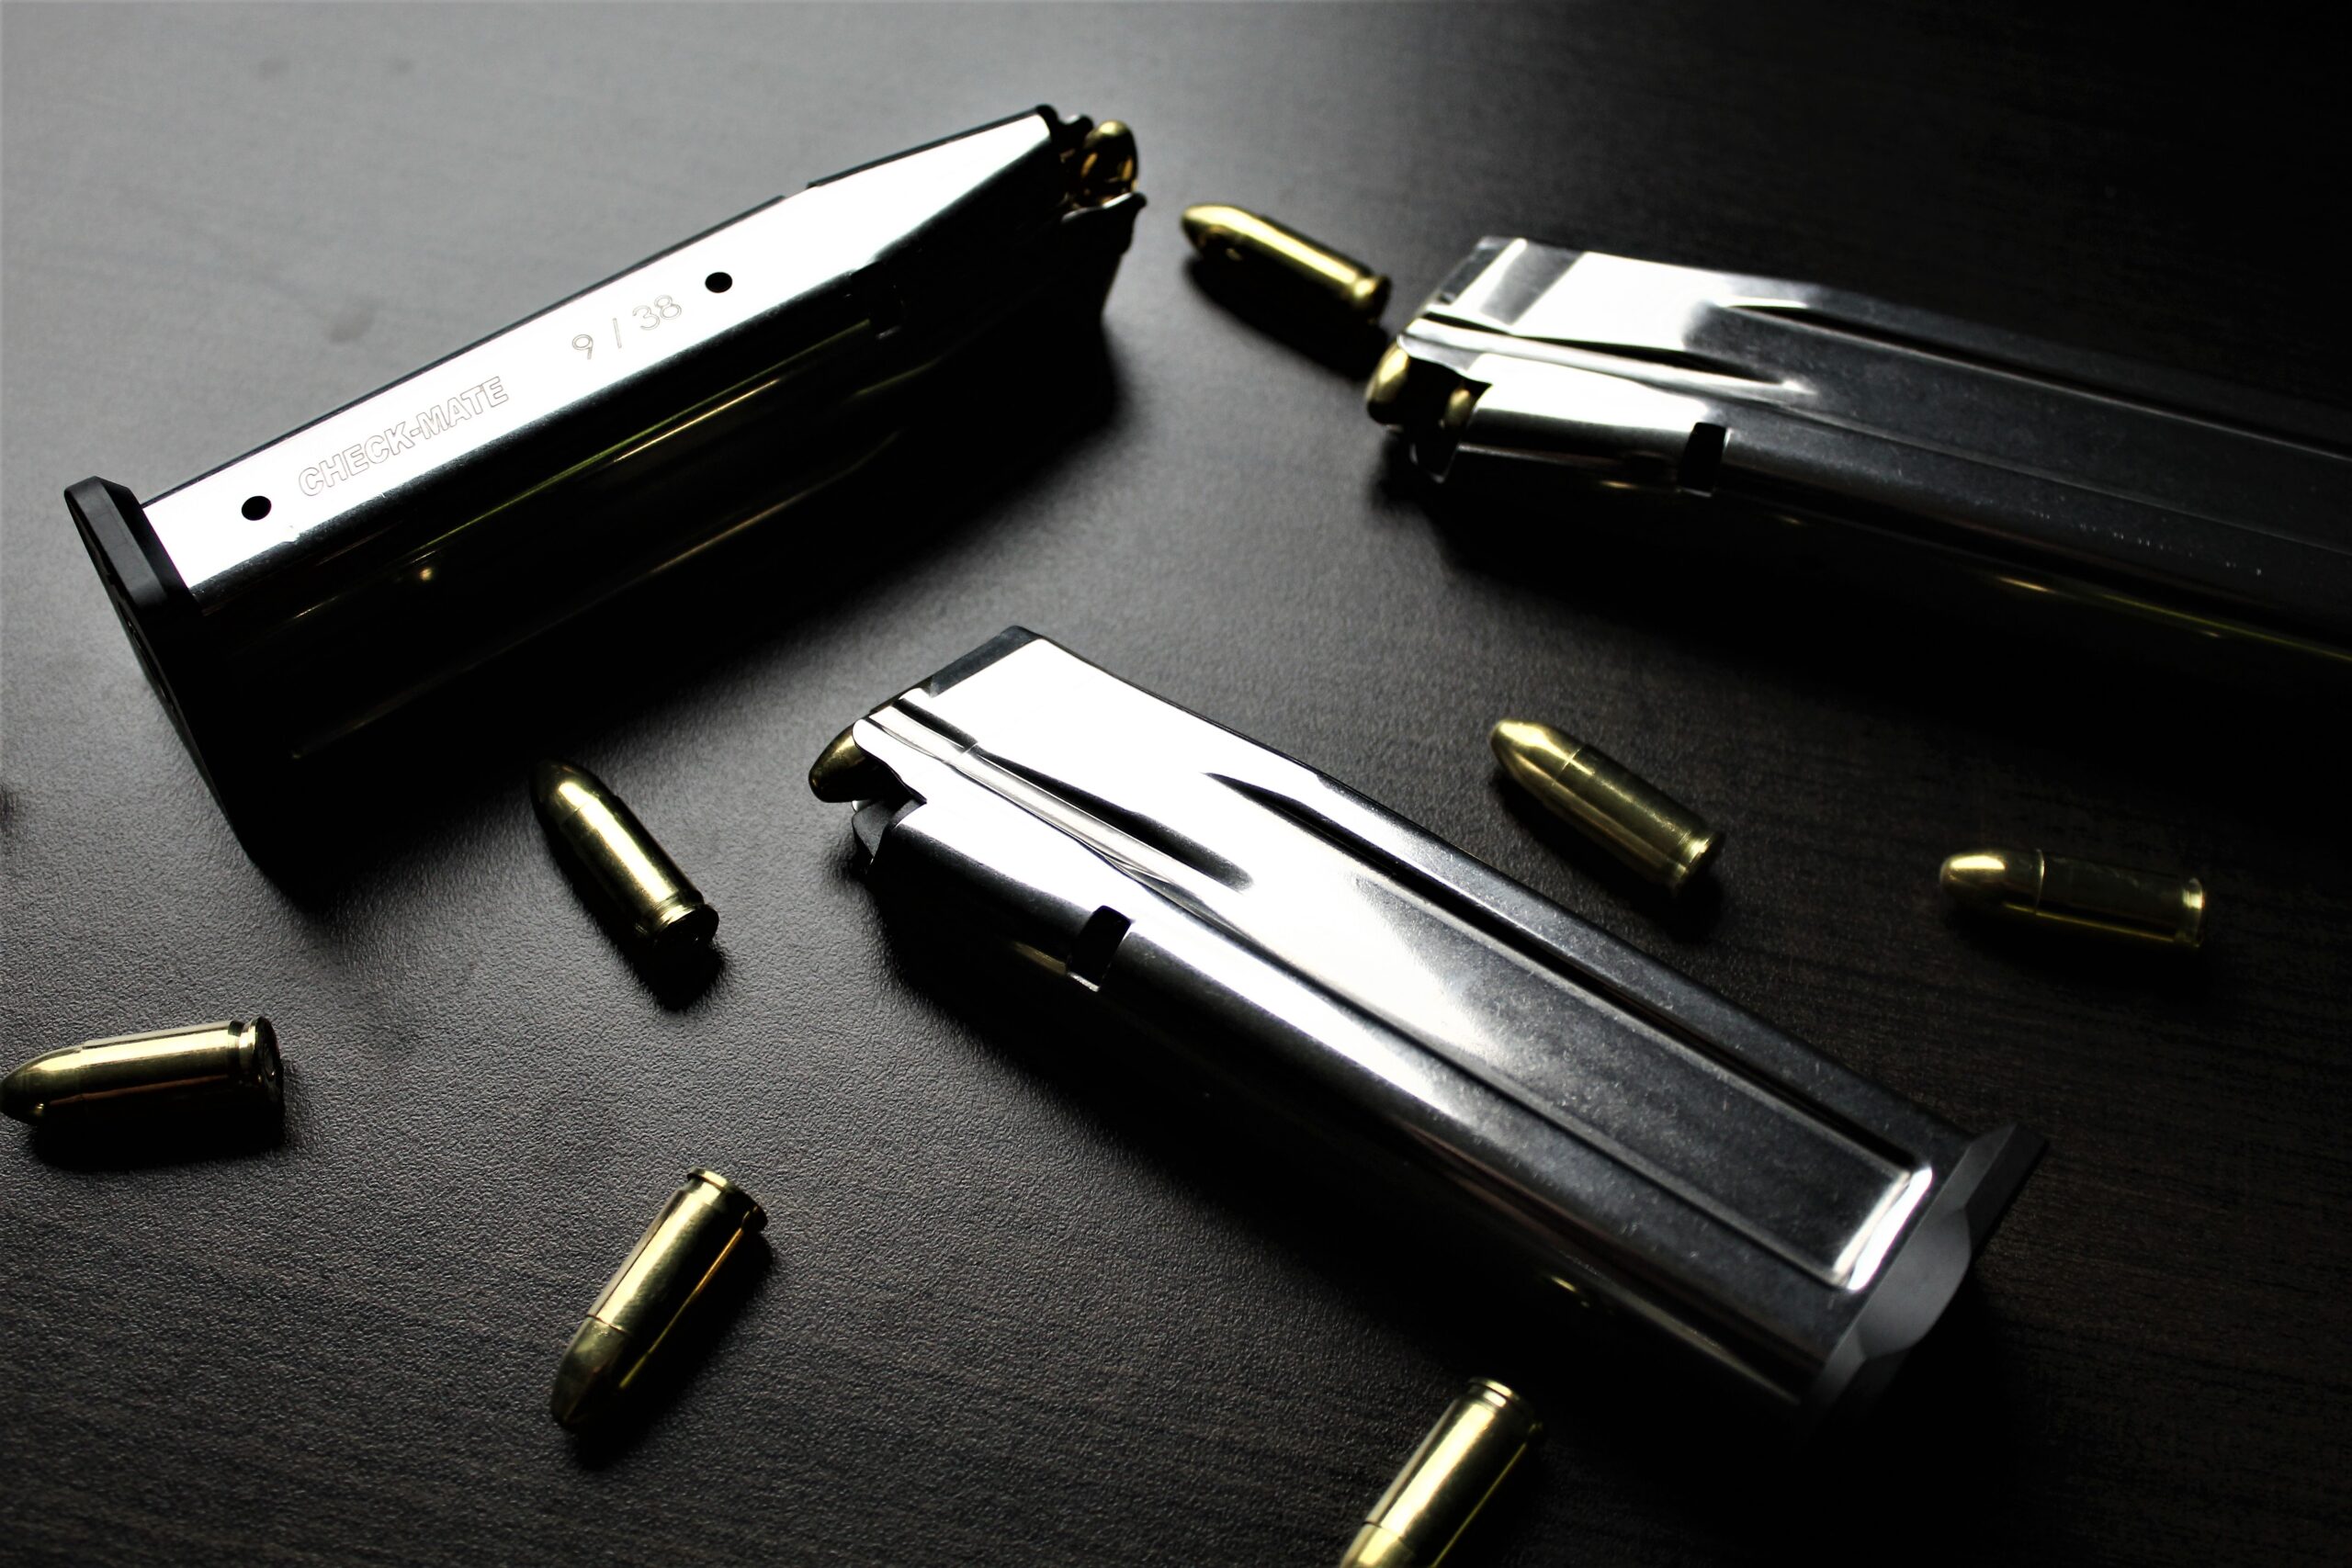 CHECK-MATE MAGAZINES - Firearm Magazines - Made in USA